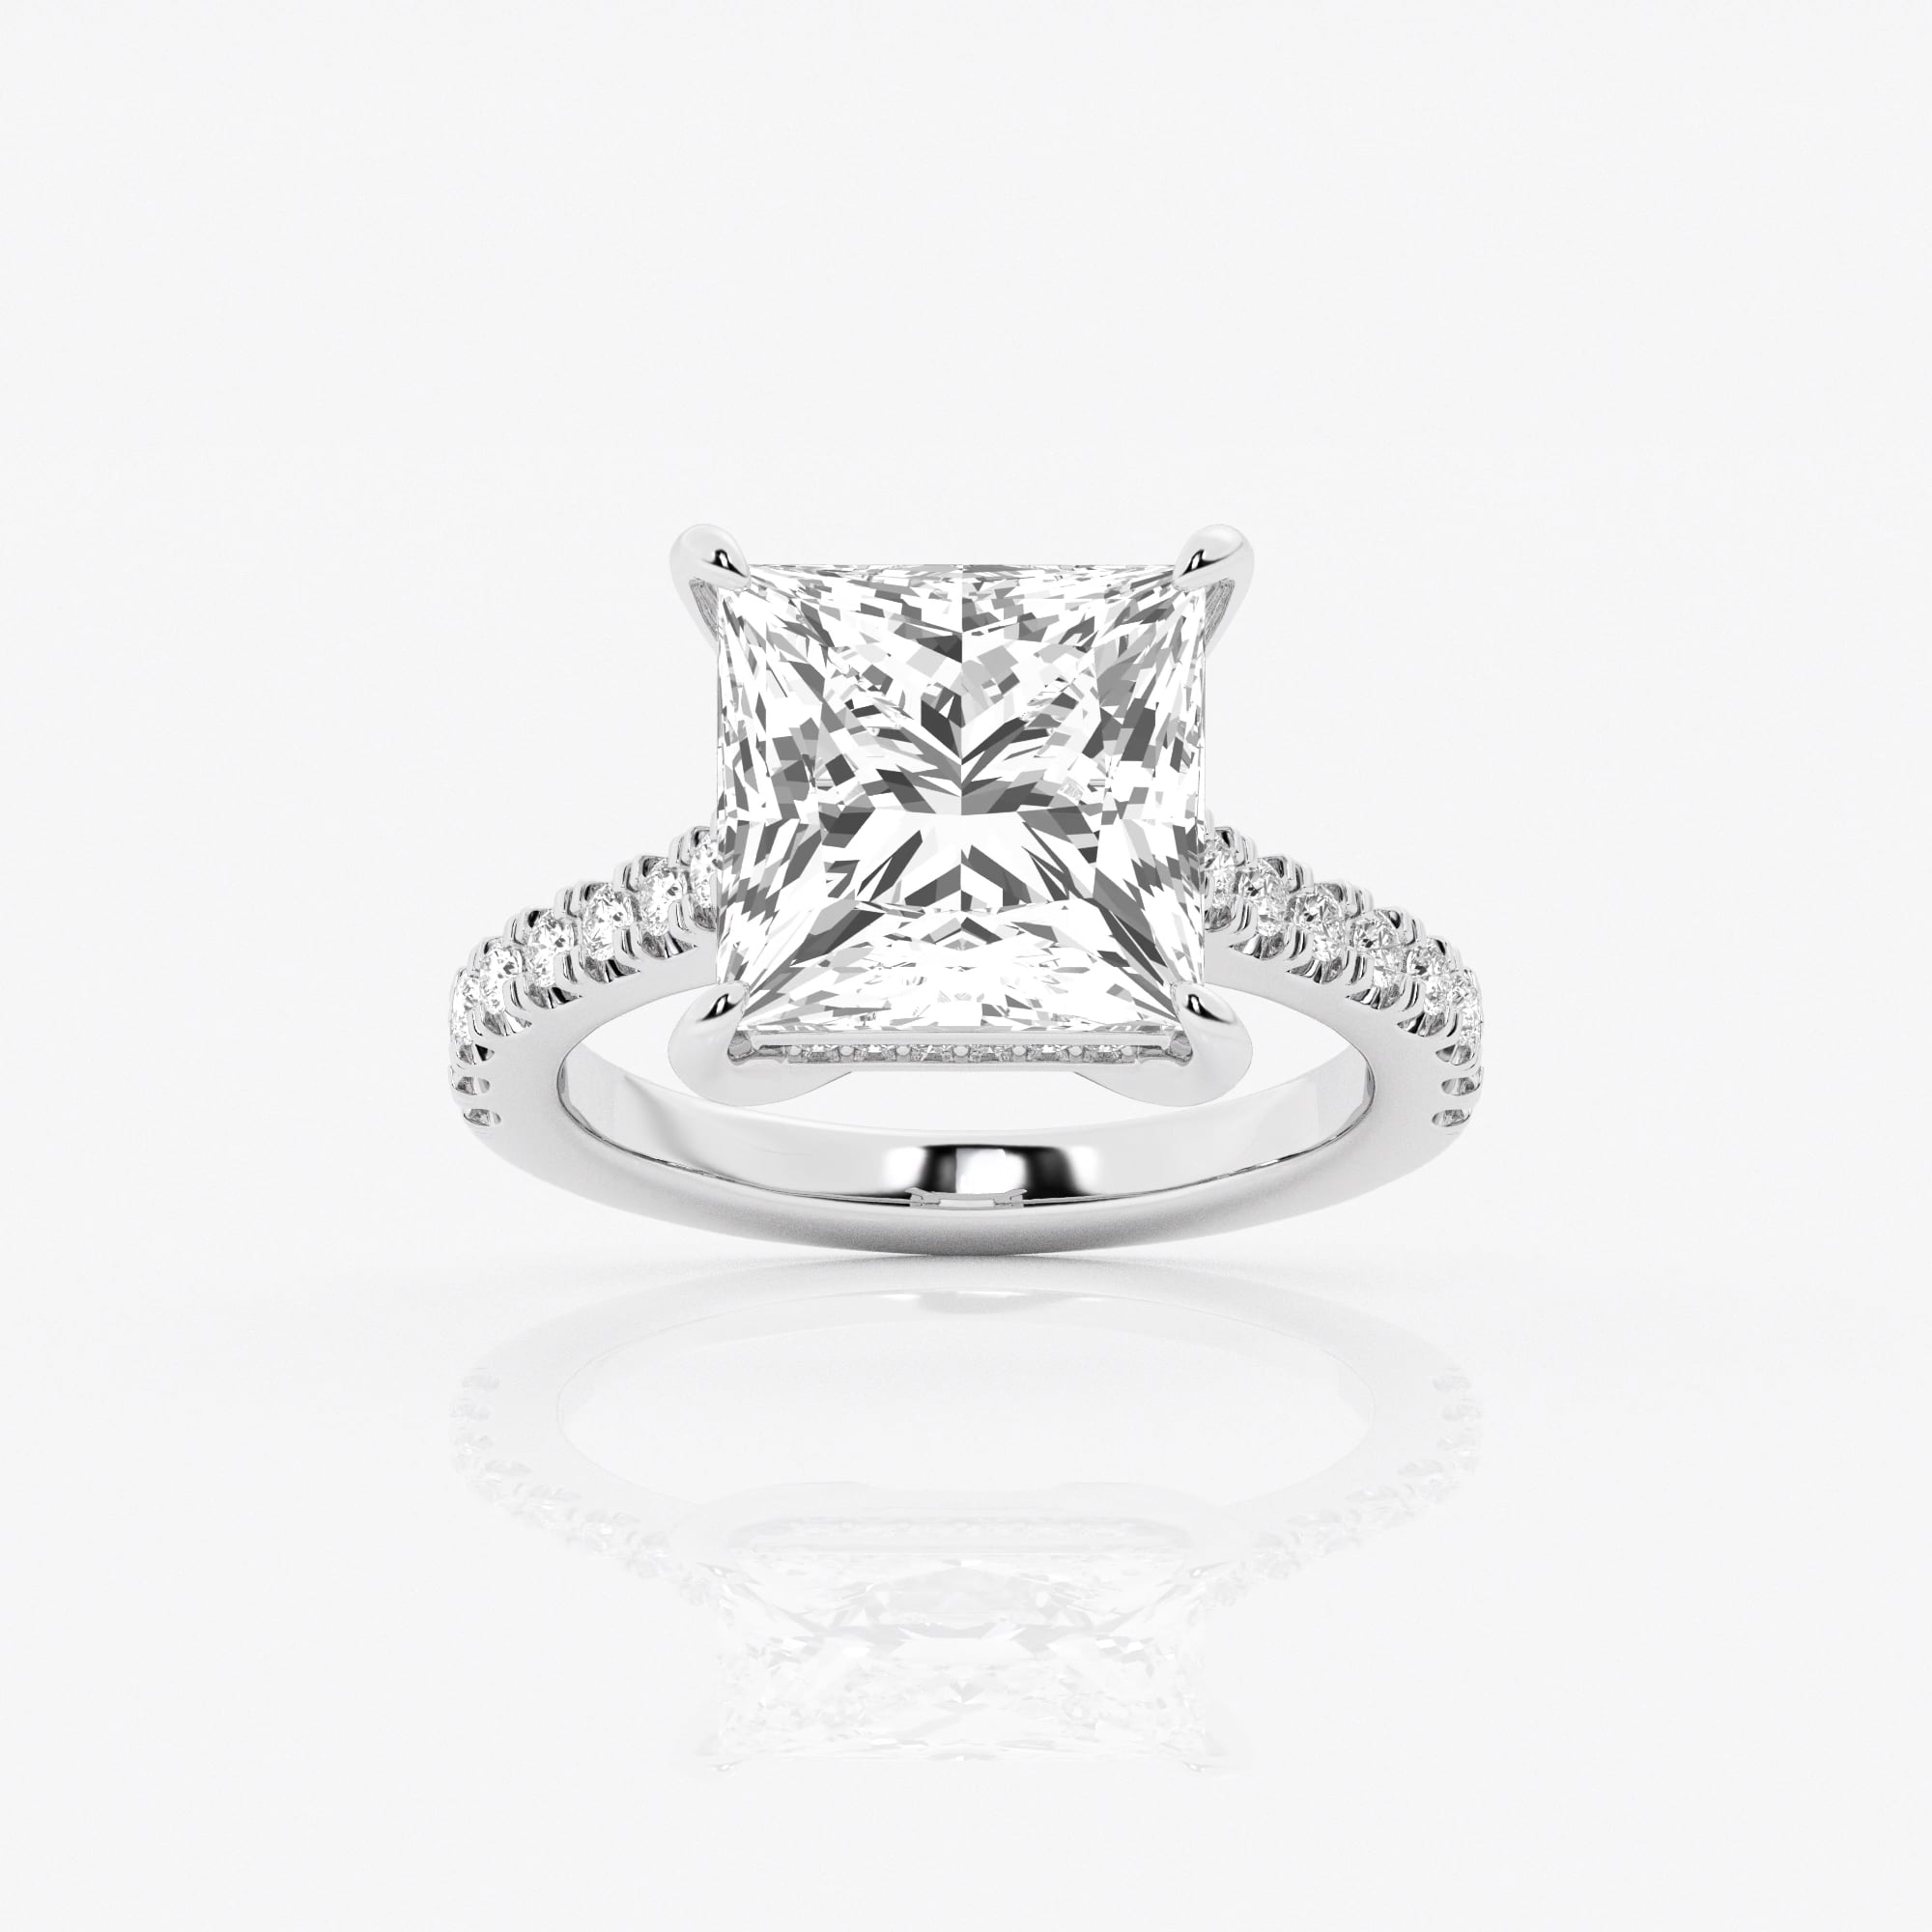 product video for Badgley Mischka Colorless 4 1/3 ctw Princess Lab Grown Diamond Hidden Halo Engagement Ring